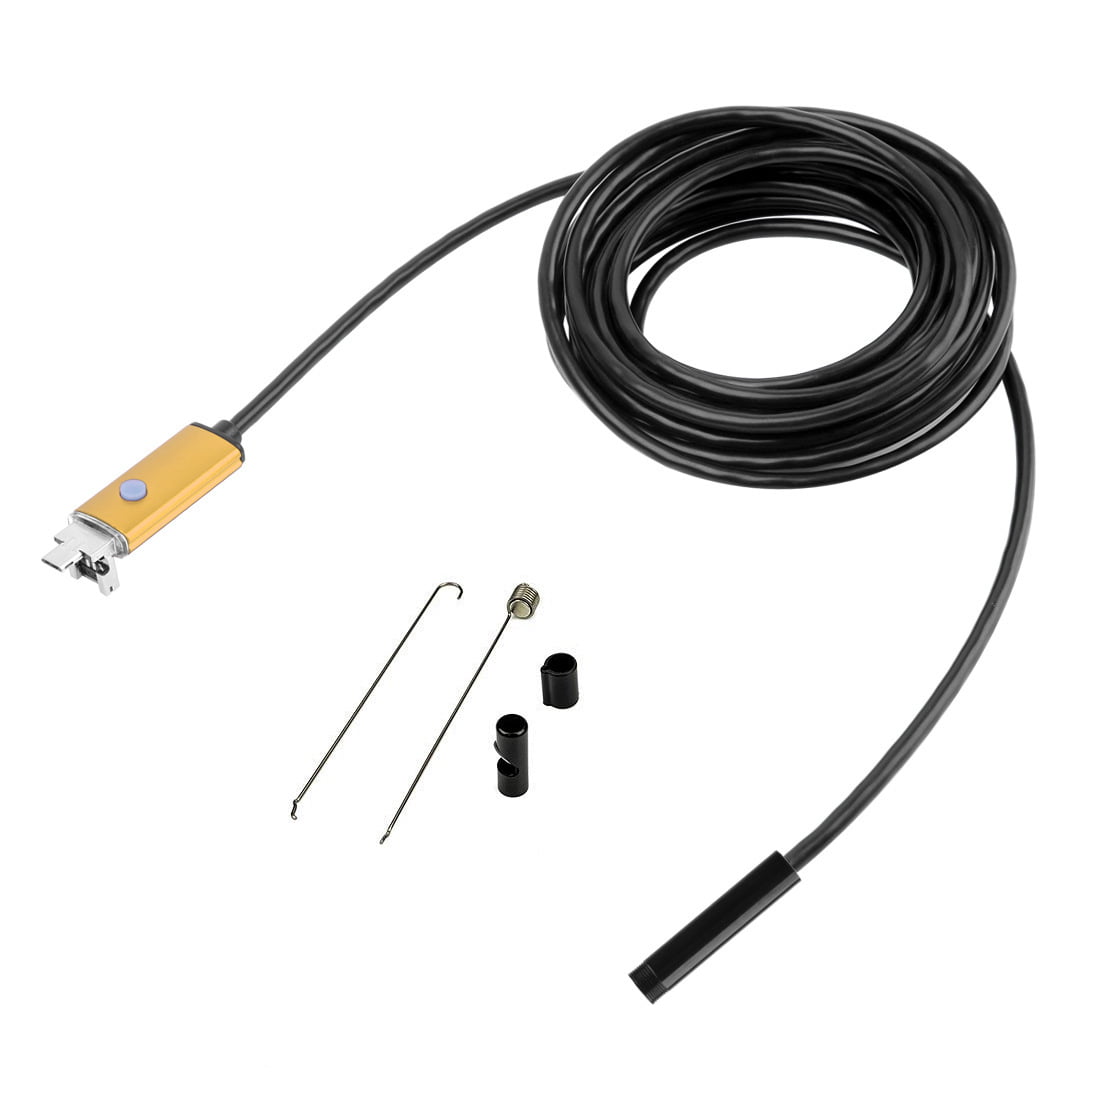 2in1 5m 6LED Endoscope USB Waterproof Borescope Inspection Camera for PC Android 